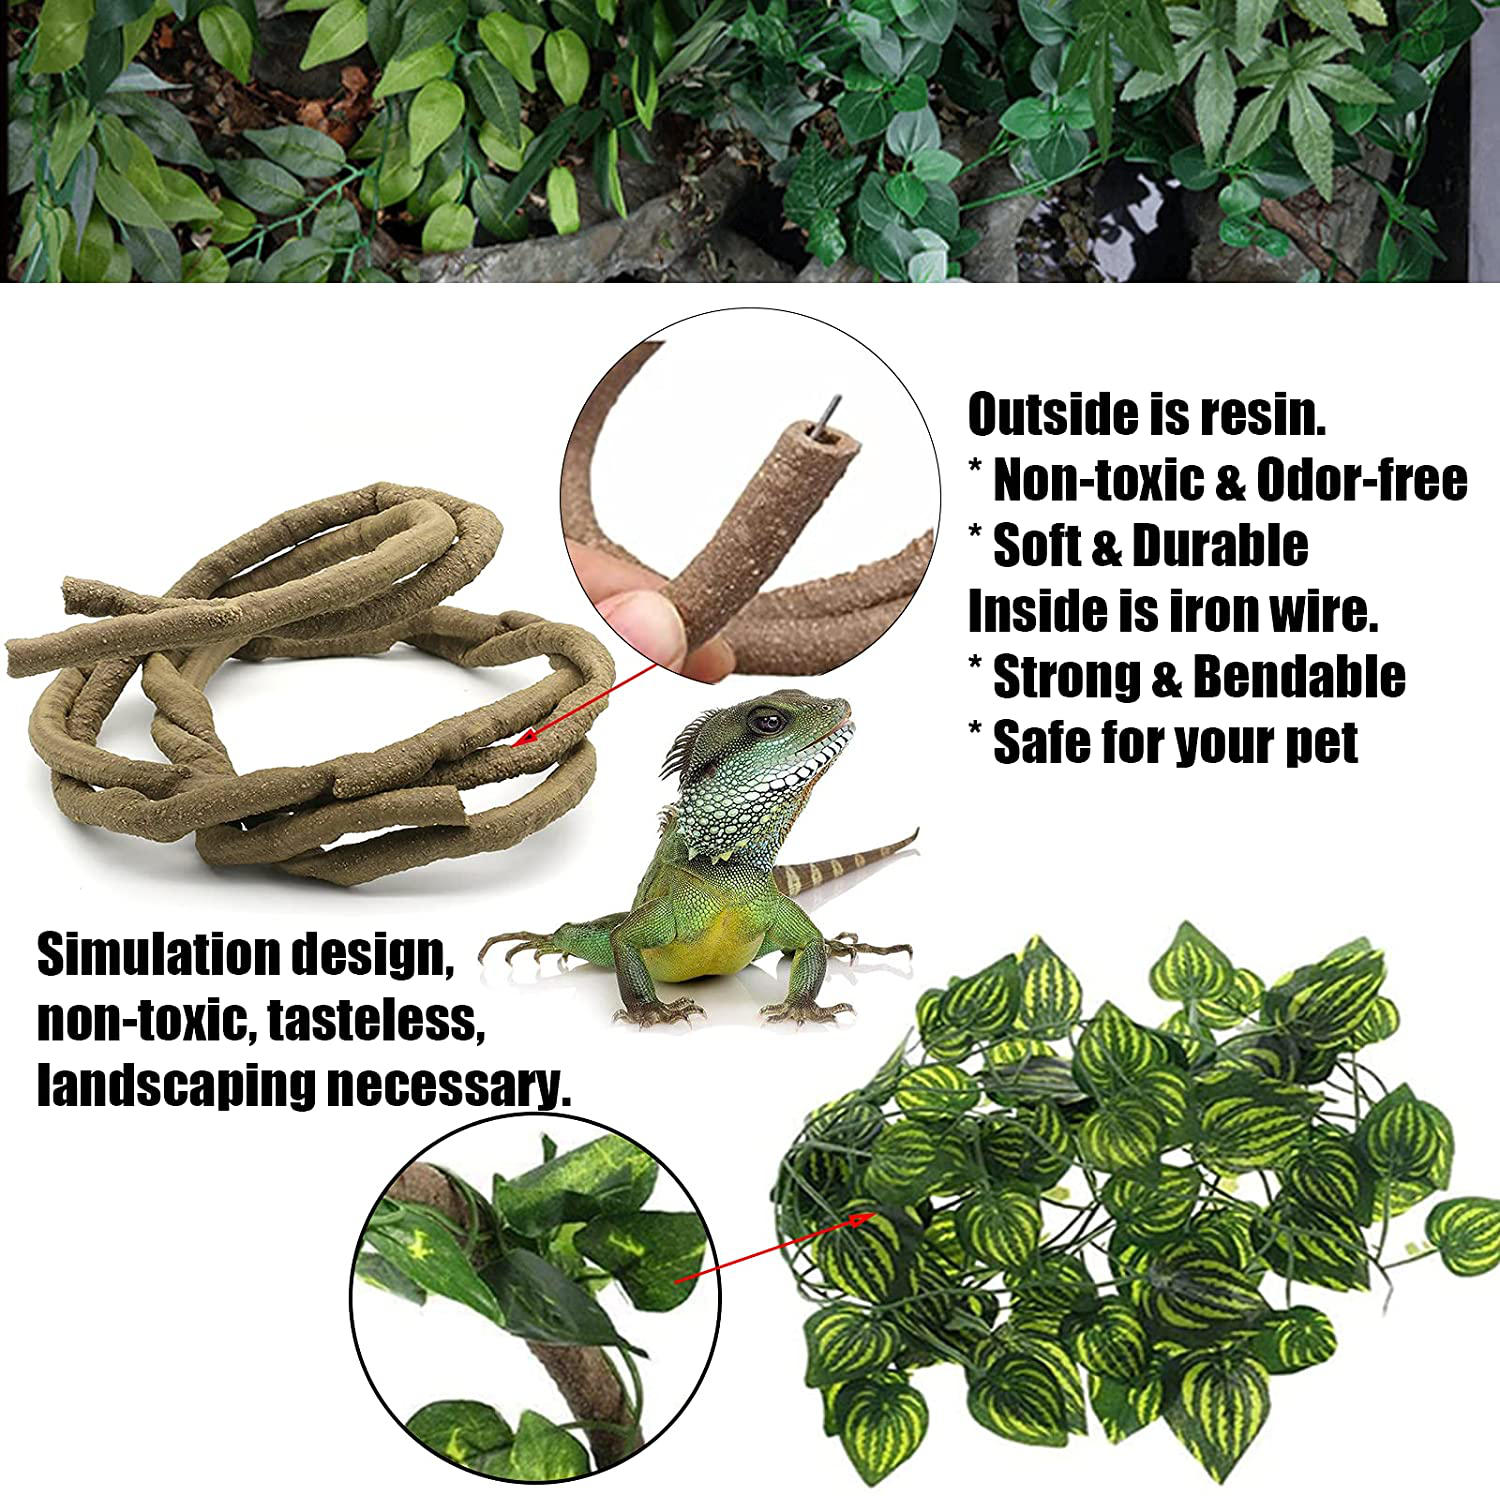 Lizard Bearded Dragon Hammock Set Tank Accessories, Coconut Shell Hut Hideout Cave Natural Seagrass Jungle Climber, Flexible Bend-A Branch Jungle Climbing Vines for Geckos and More Reptiles Perched Animals & Pet Supplies > Pet Supplies > Reptile & Amphibian Supplies > Reptile & Amphibian Habitats kathson   